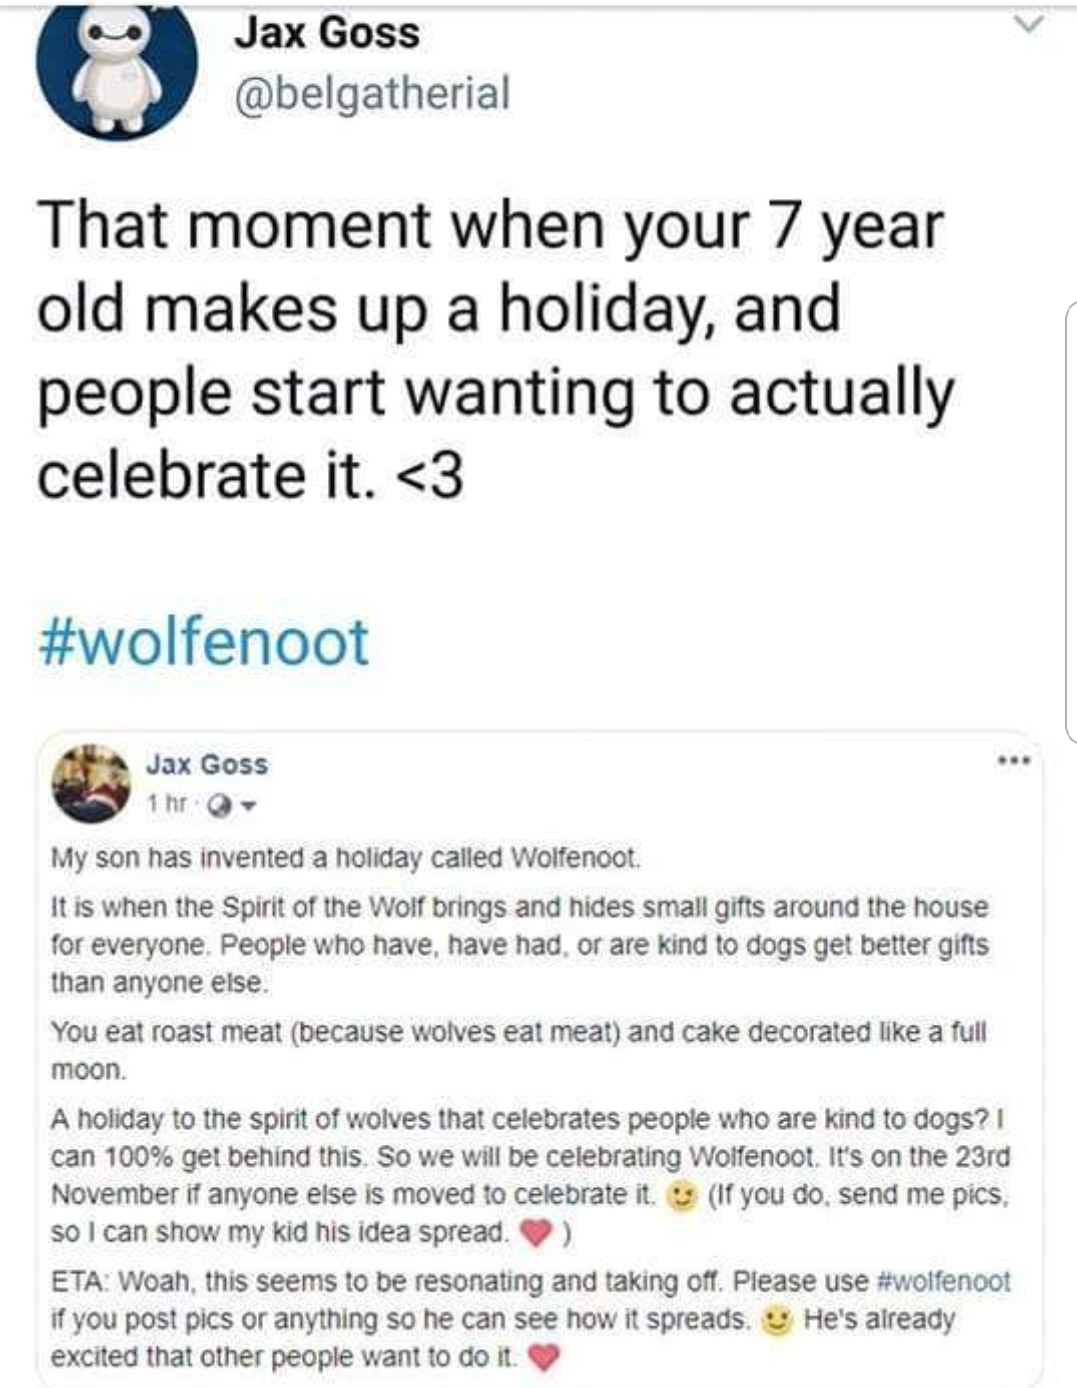 wolfenoot cakes - Jax Goss That moment when your 7 year old makes up a holiday, and people start wanting to actually celebrate it.